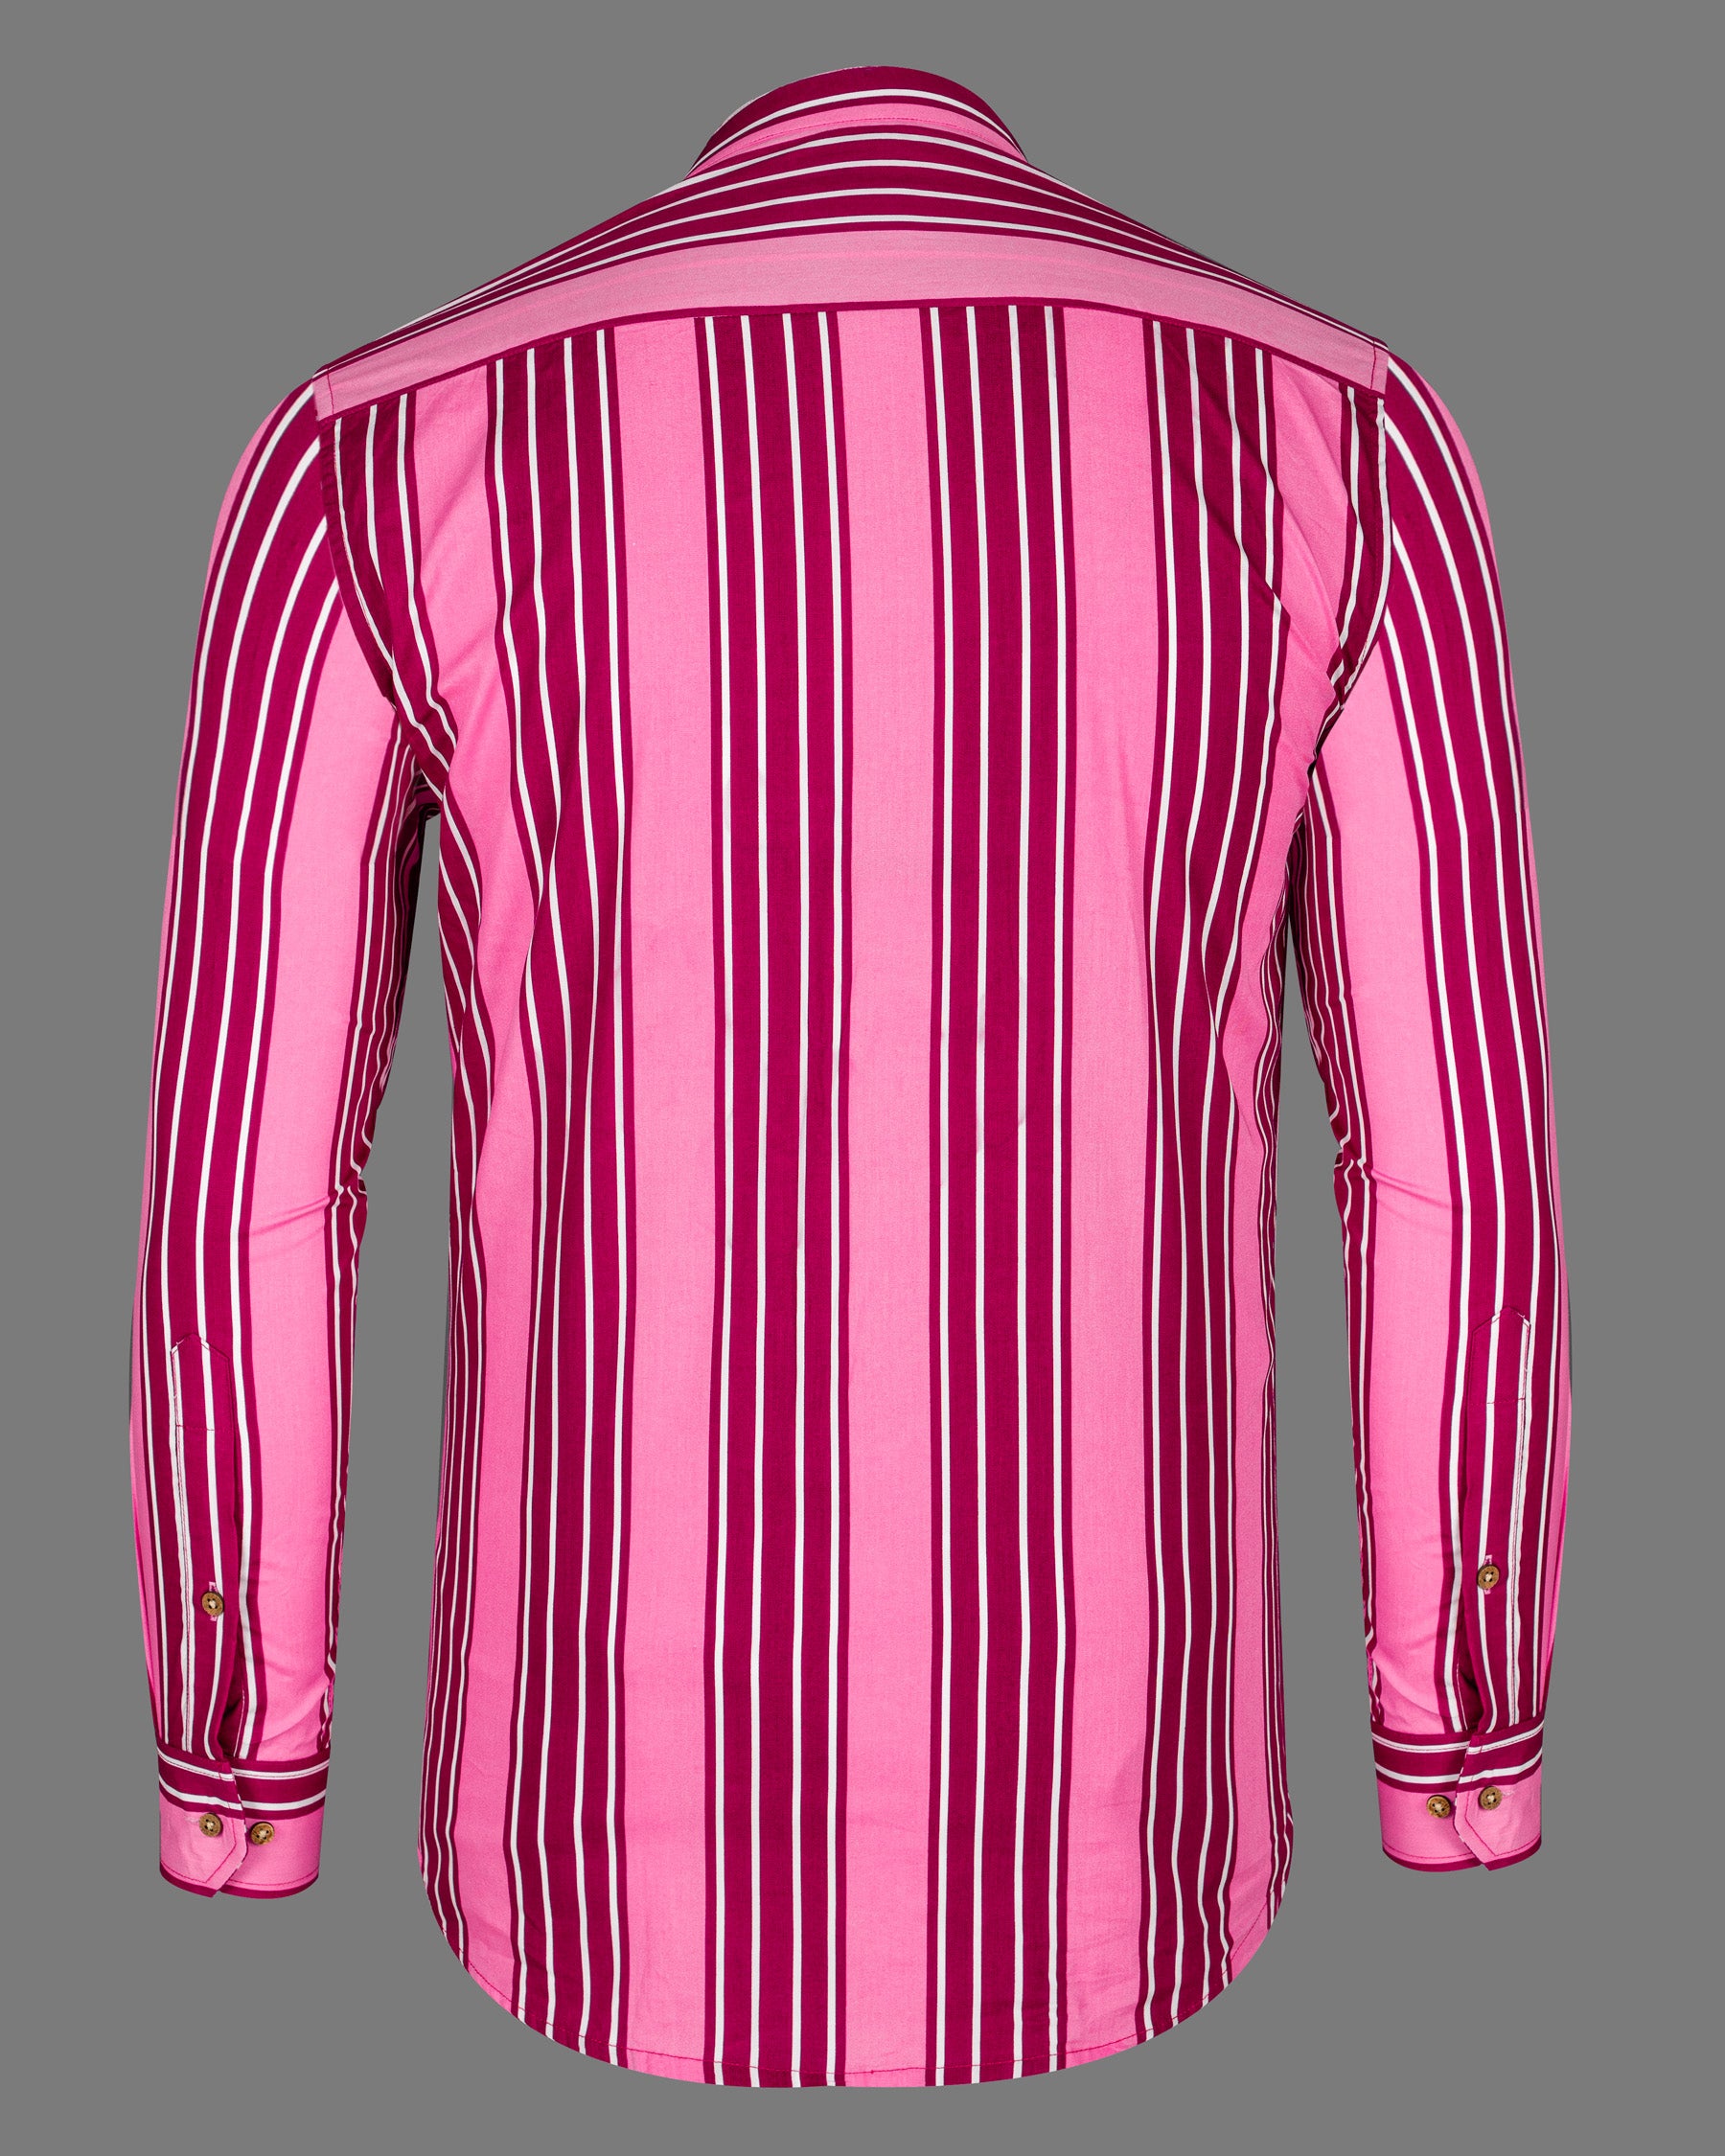 Tickle Me Pink and Razzberry Jam Striped Premium Cotton Kurta Shirt 5804-KS-38, 5804-KS-H-38, 5804-KS-39, 5804-KS-H-39, 5804-KS-40, 5804-KS-H-40, 5804-KS-42, 5804-KS-H-42, 5804-KS-44, 5804-KS-H-44, 5804-KS-46, 5804-KS-H-46, 5804-KS-48, 5804-KS-H-48, 5804-KS-50, 5804-KS-H-50, 5804-KS-52, 5804-KS-H-52